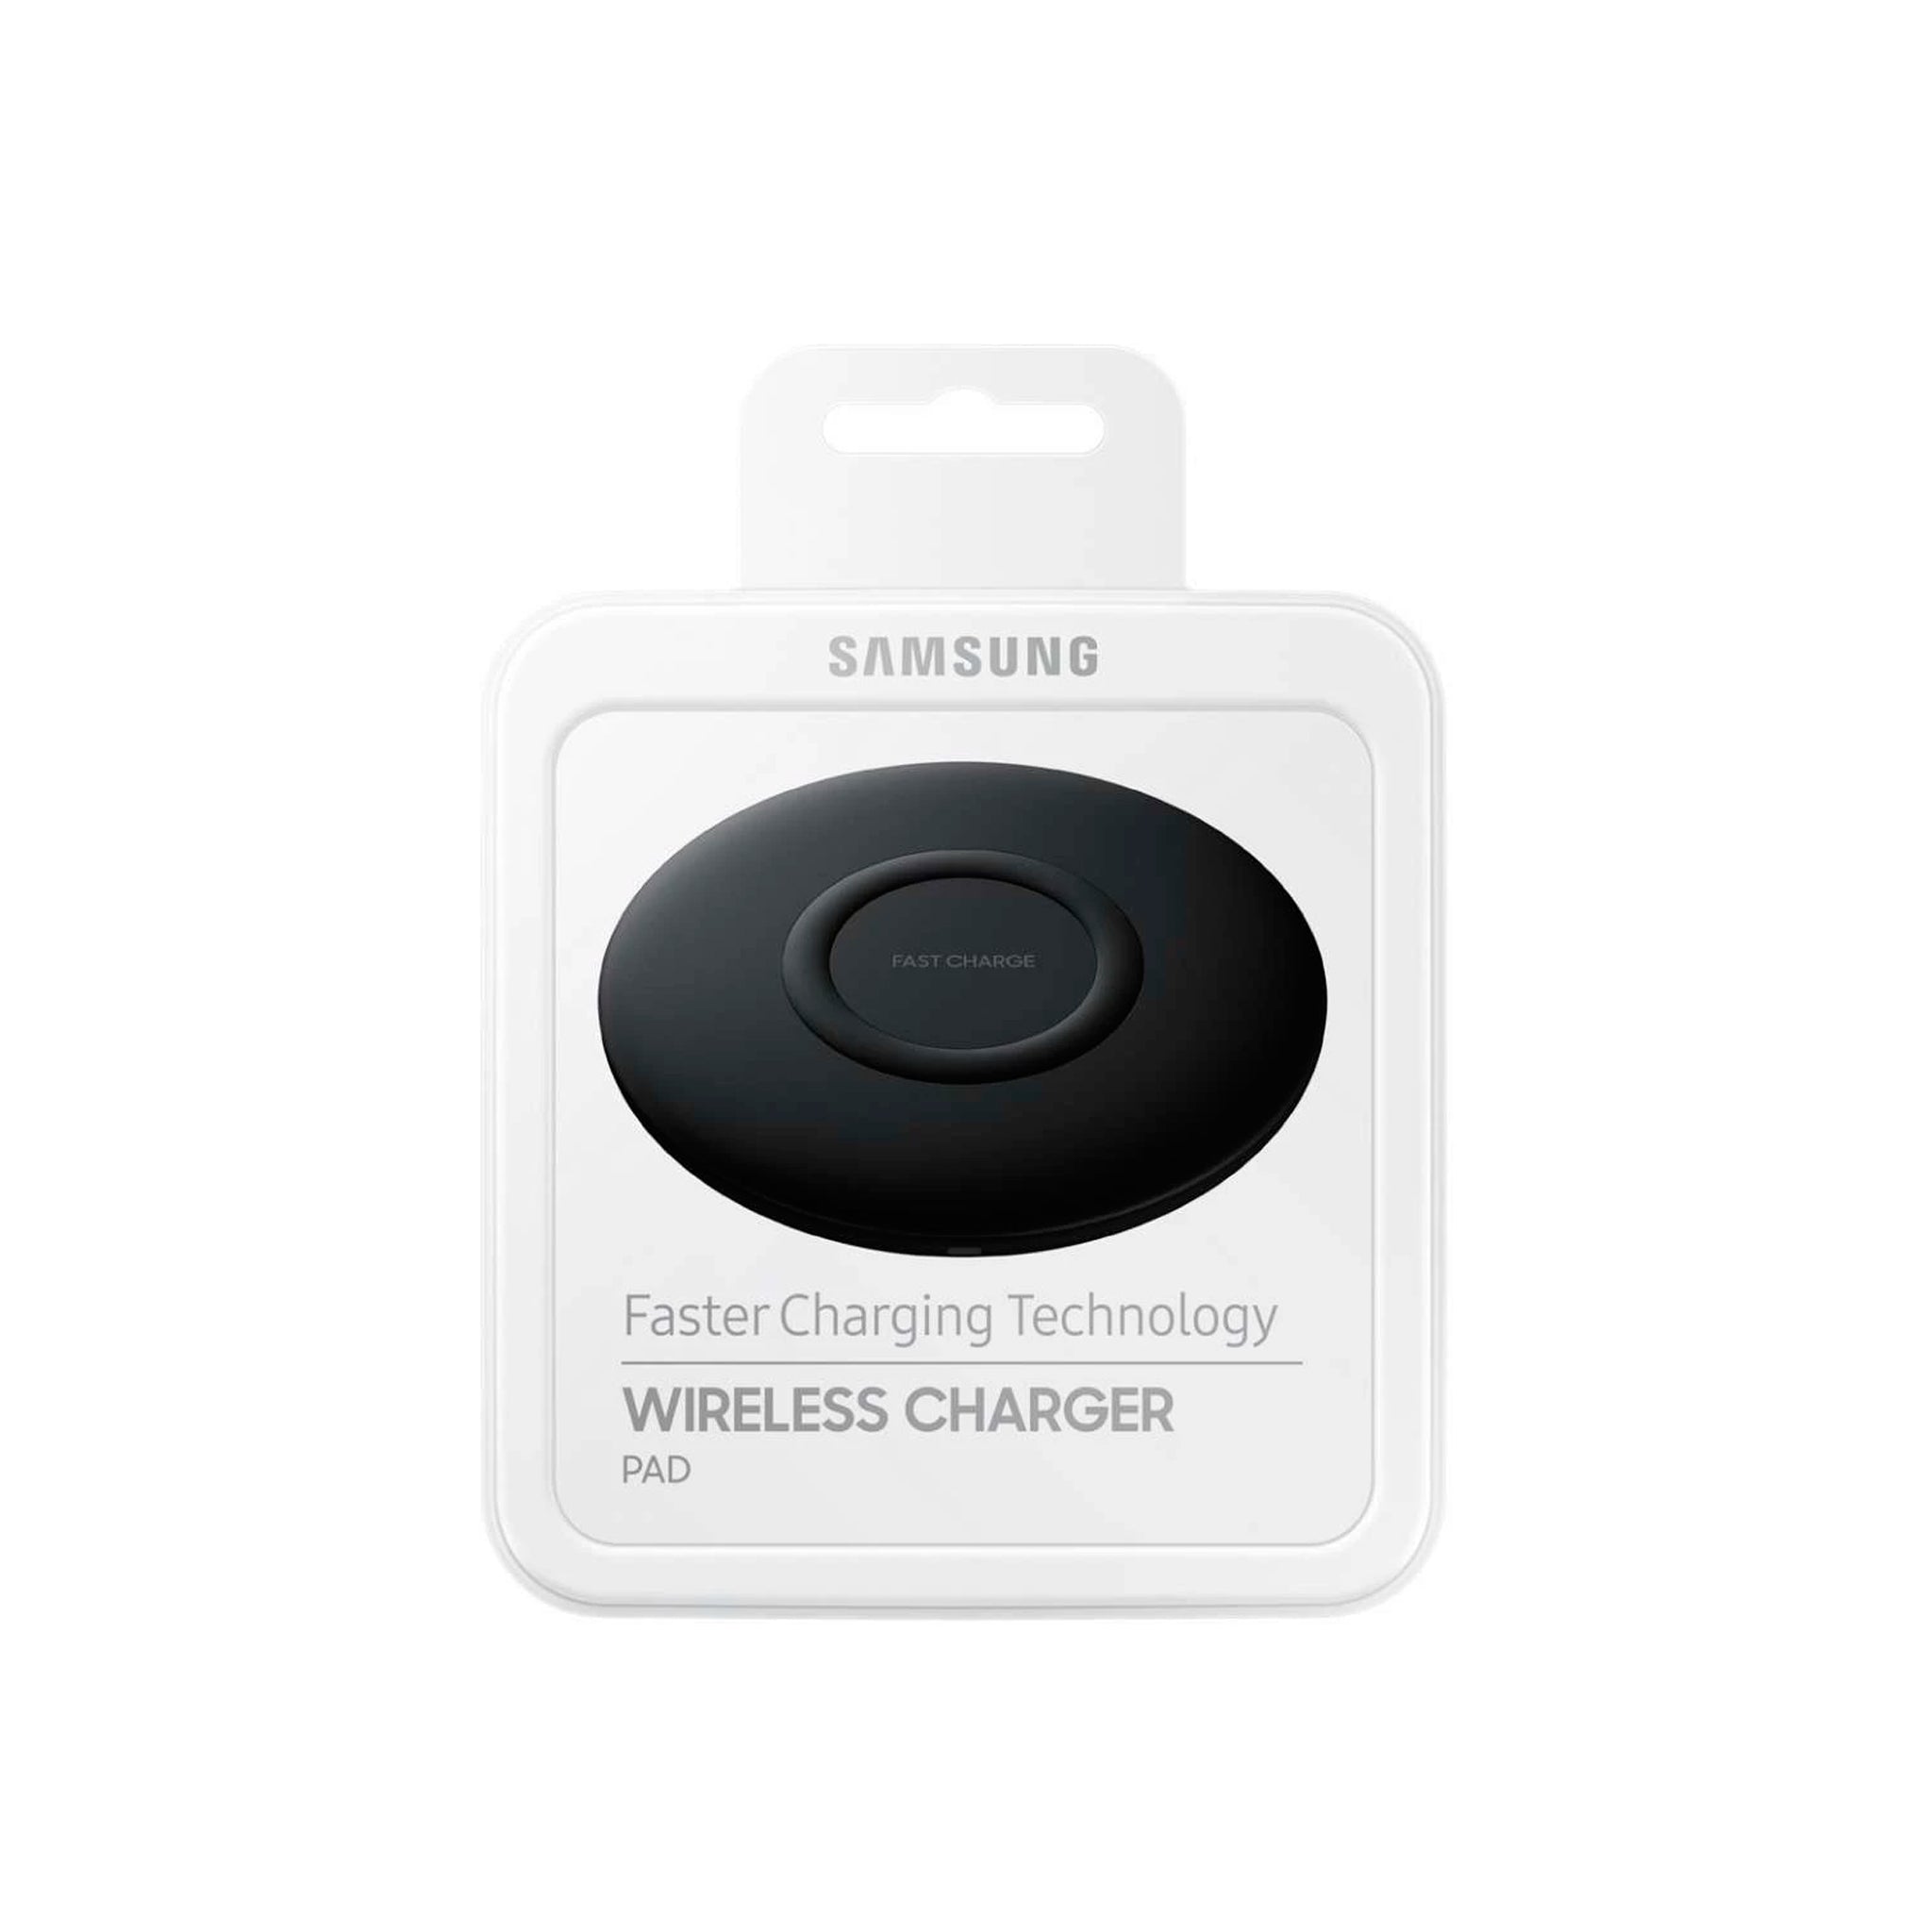 Samsung - Wireless Charger Pad , Small - Black